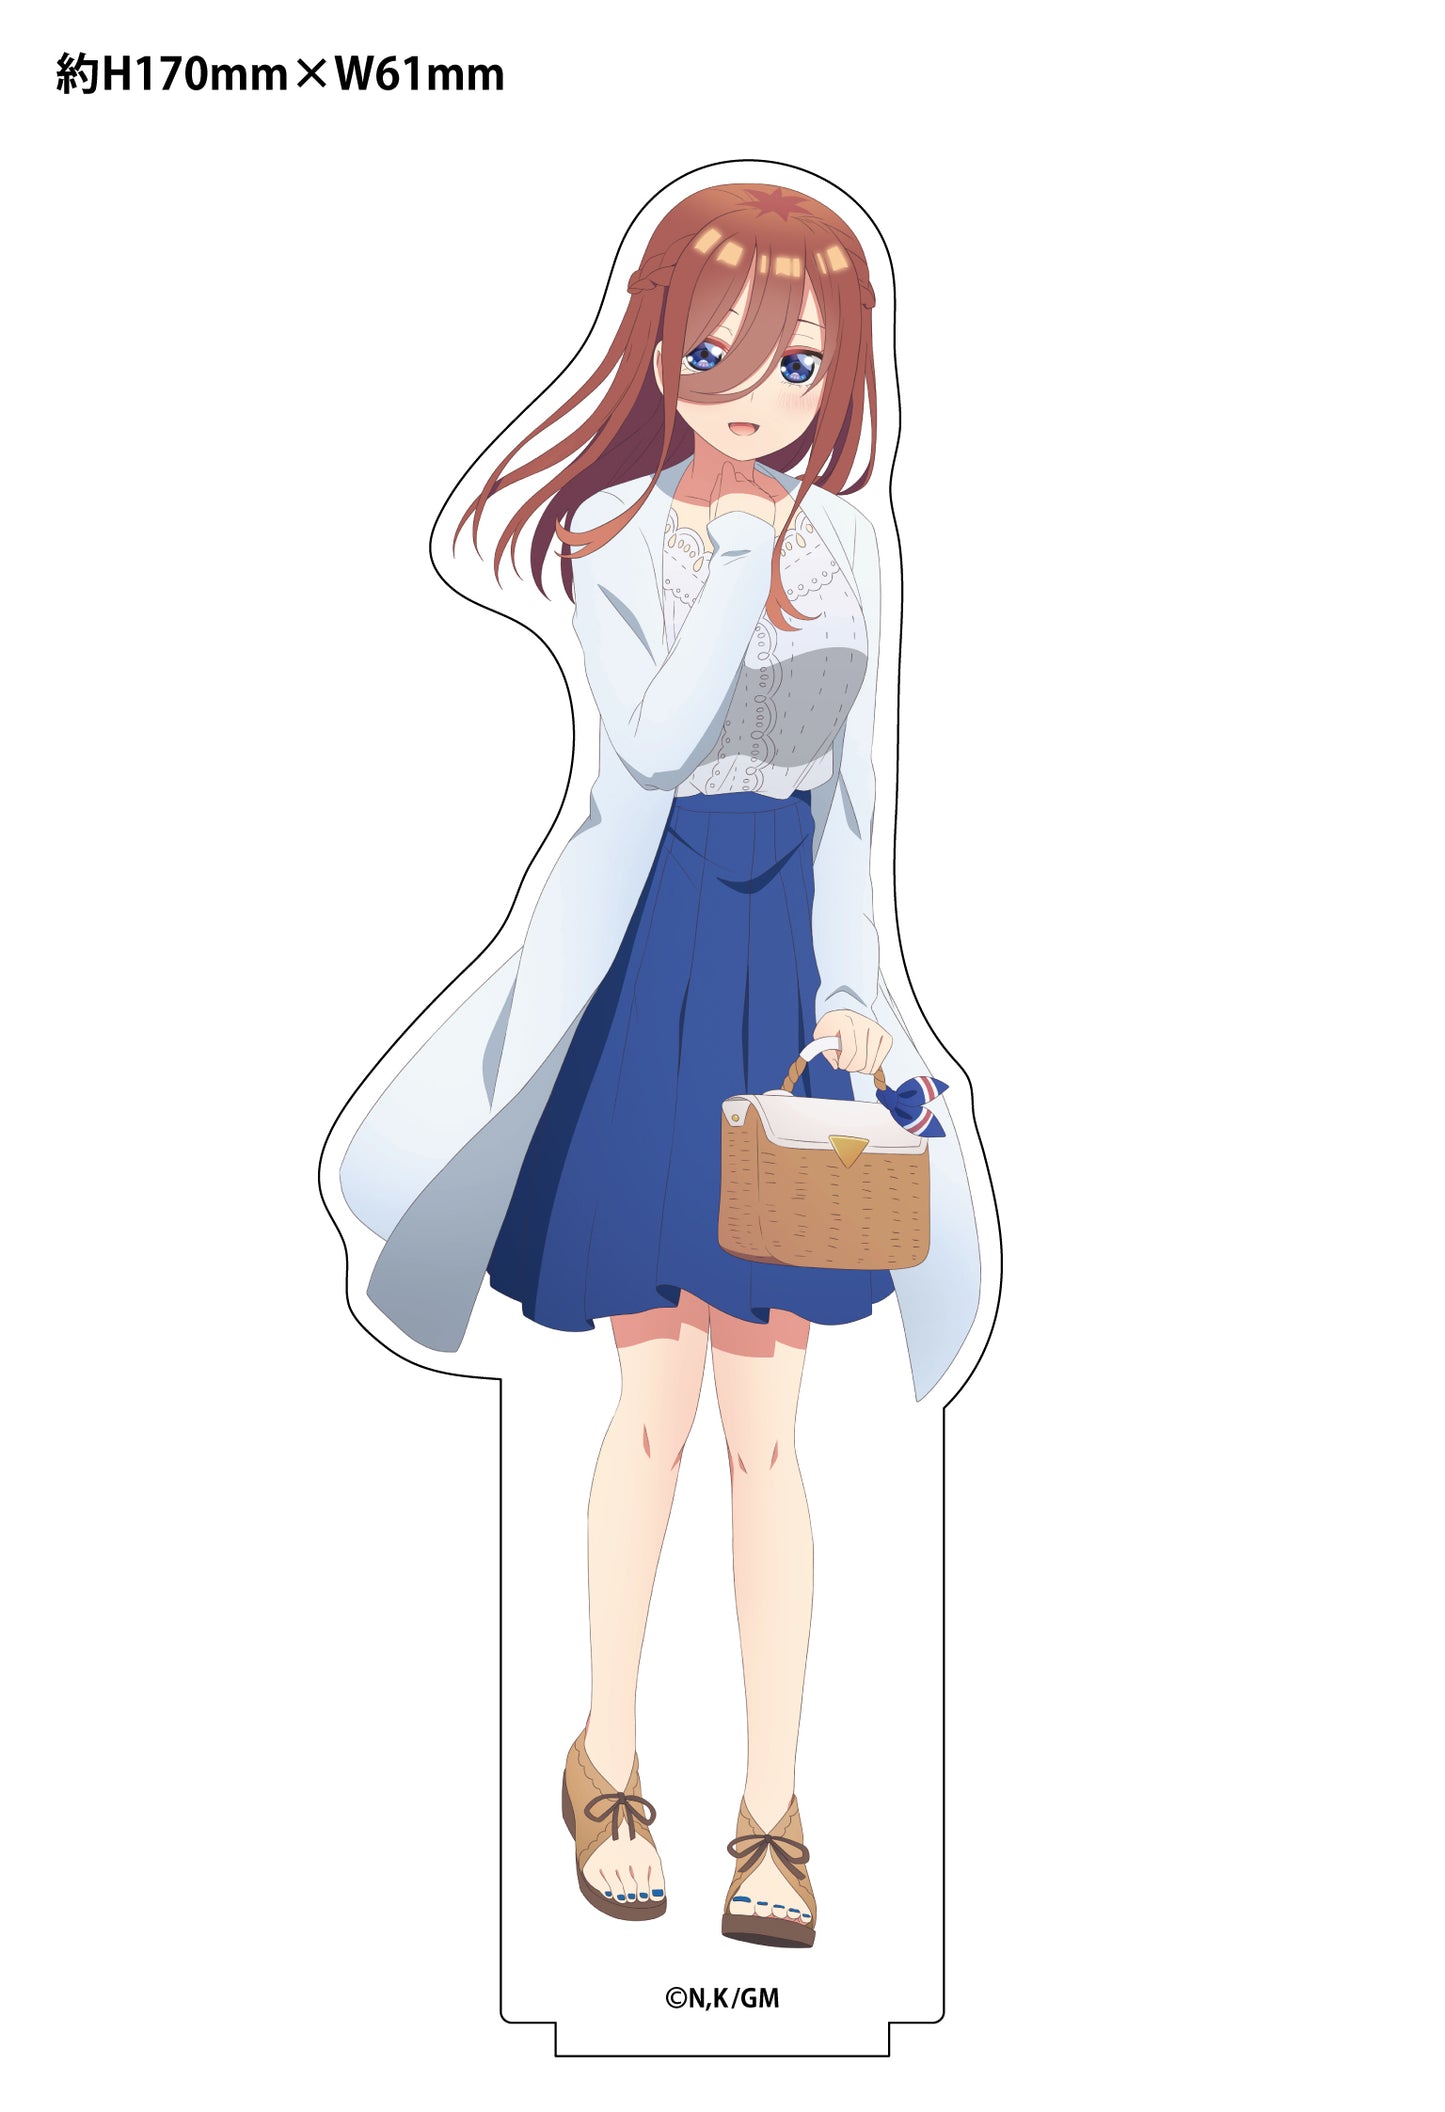 "The Quintessential Quintuplets Movie" Original Illustration Acrylic Stand Casual Outfit Ver.